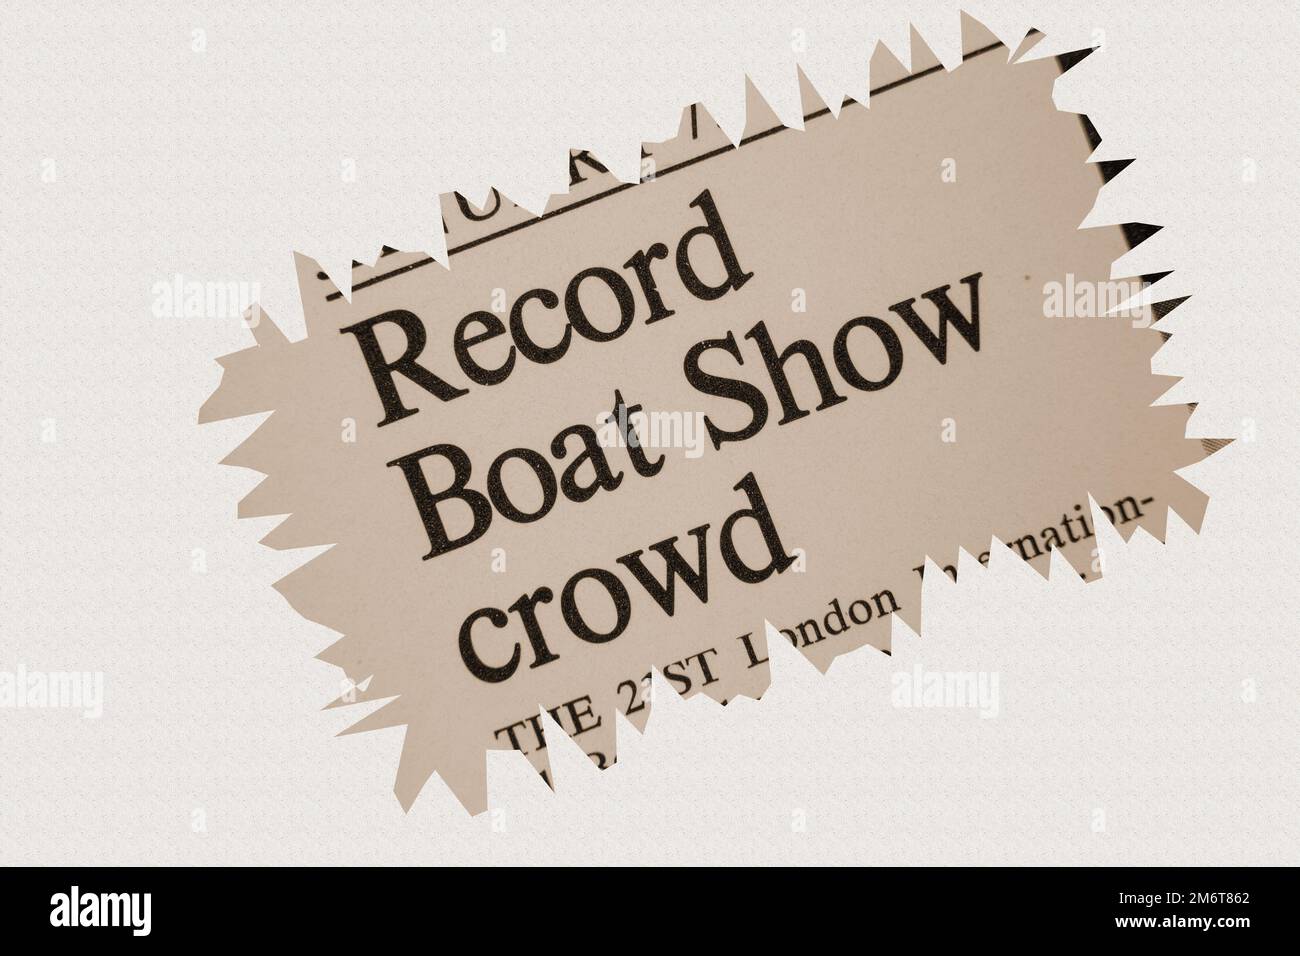 news story from 1975 newspaper headline article title - Record Boat Show crowd in sepia Stock Photo